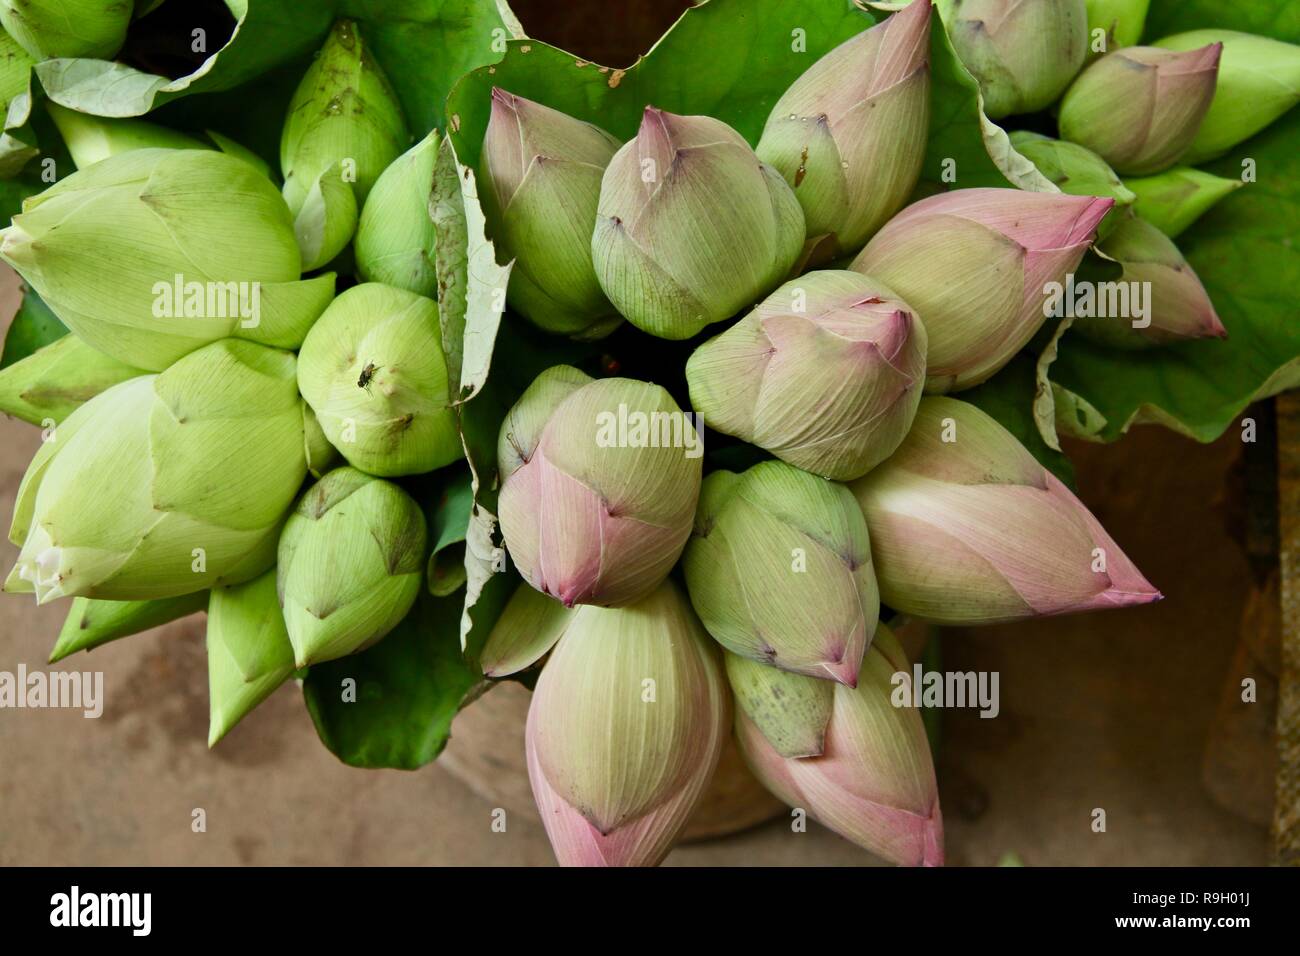 White and pink lotus buds in a market sold for blessings Stock Photo